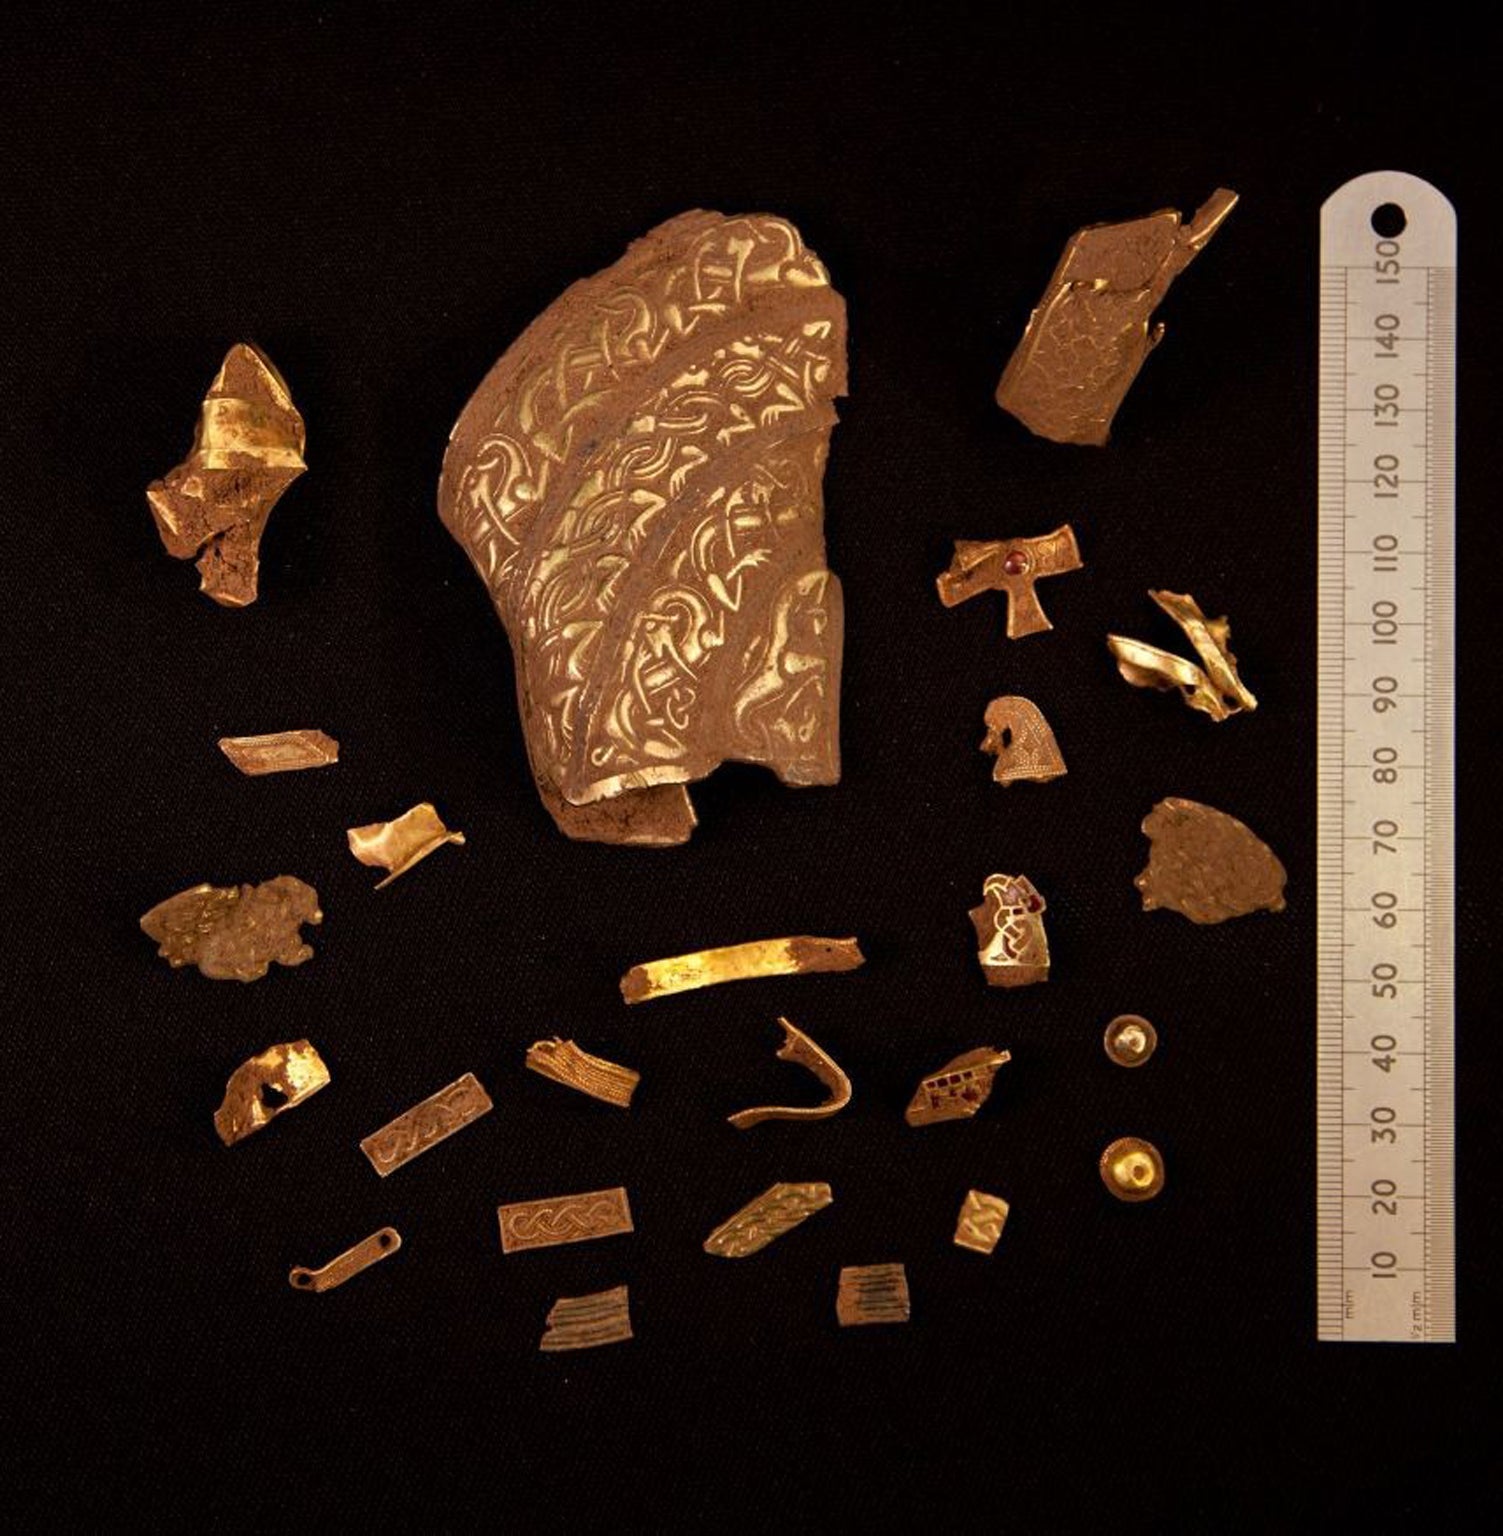 A selection of the new pieces of gold and silver found at the site